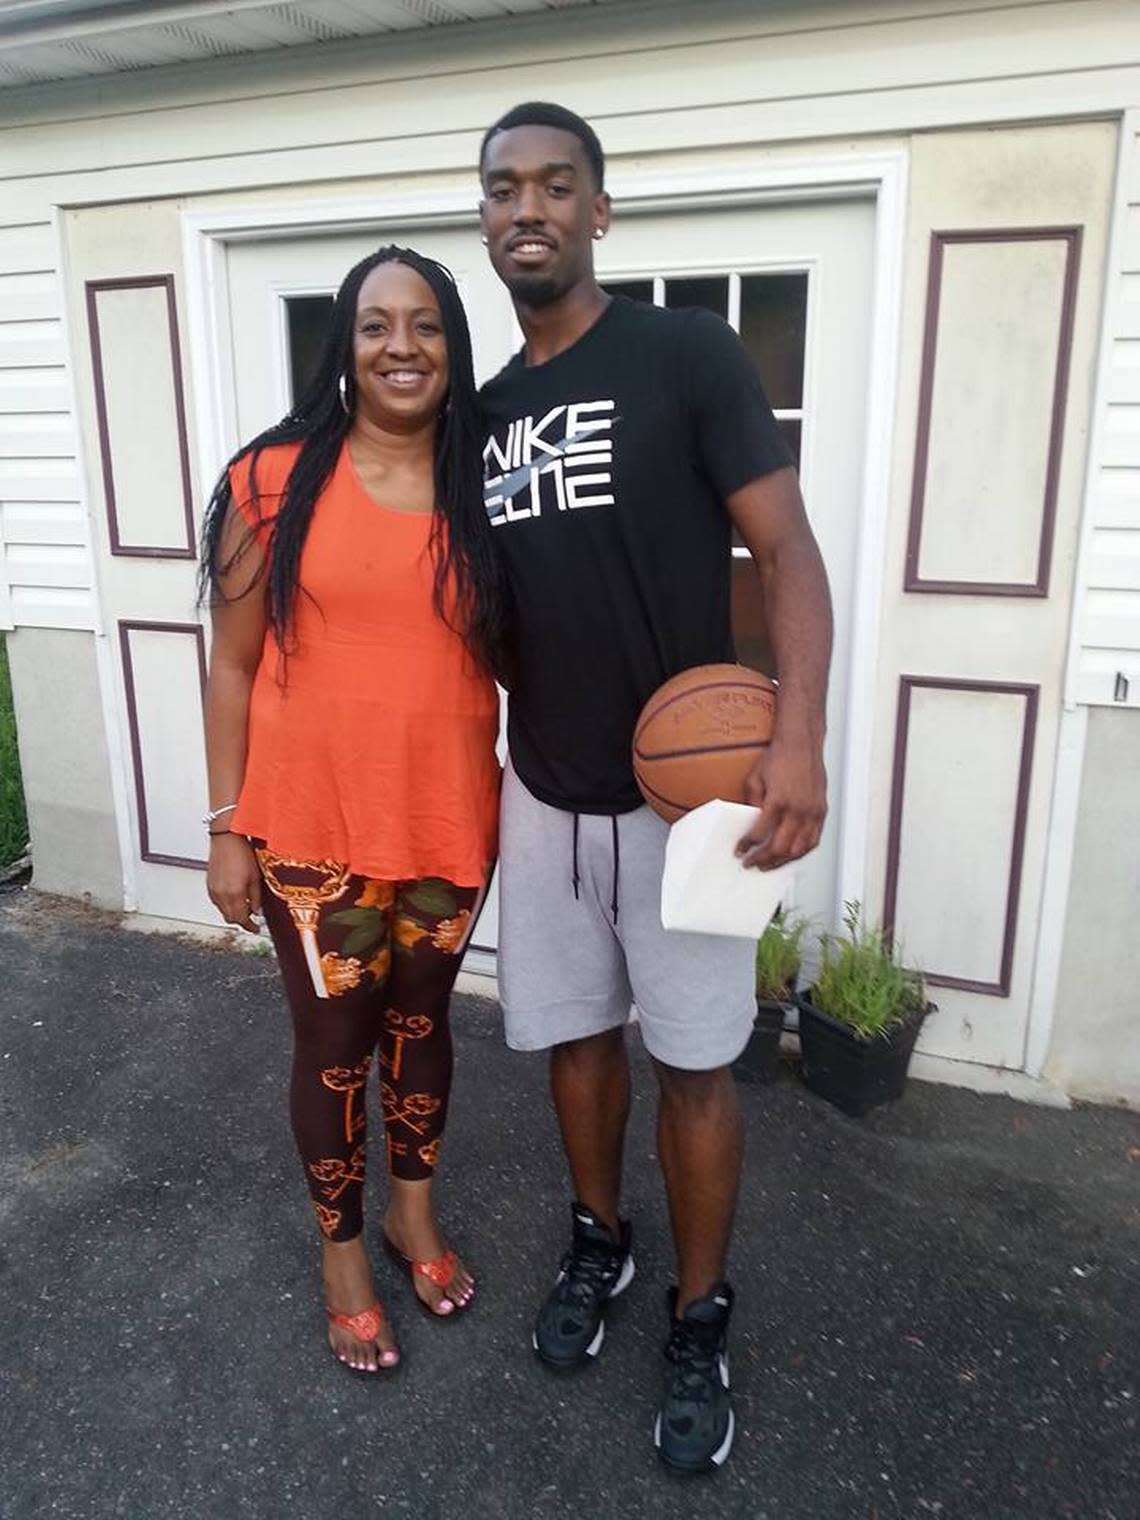 Rashard Kelly and his mother, Tammy, at their home in Fredericksburg, Va. following her cancer-free clearance in 2015.